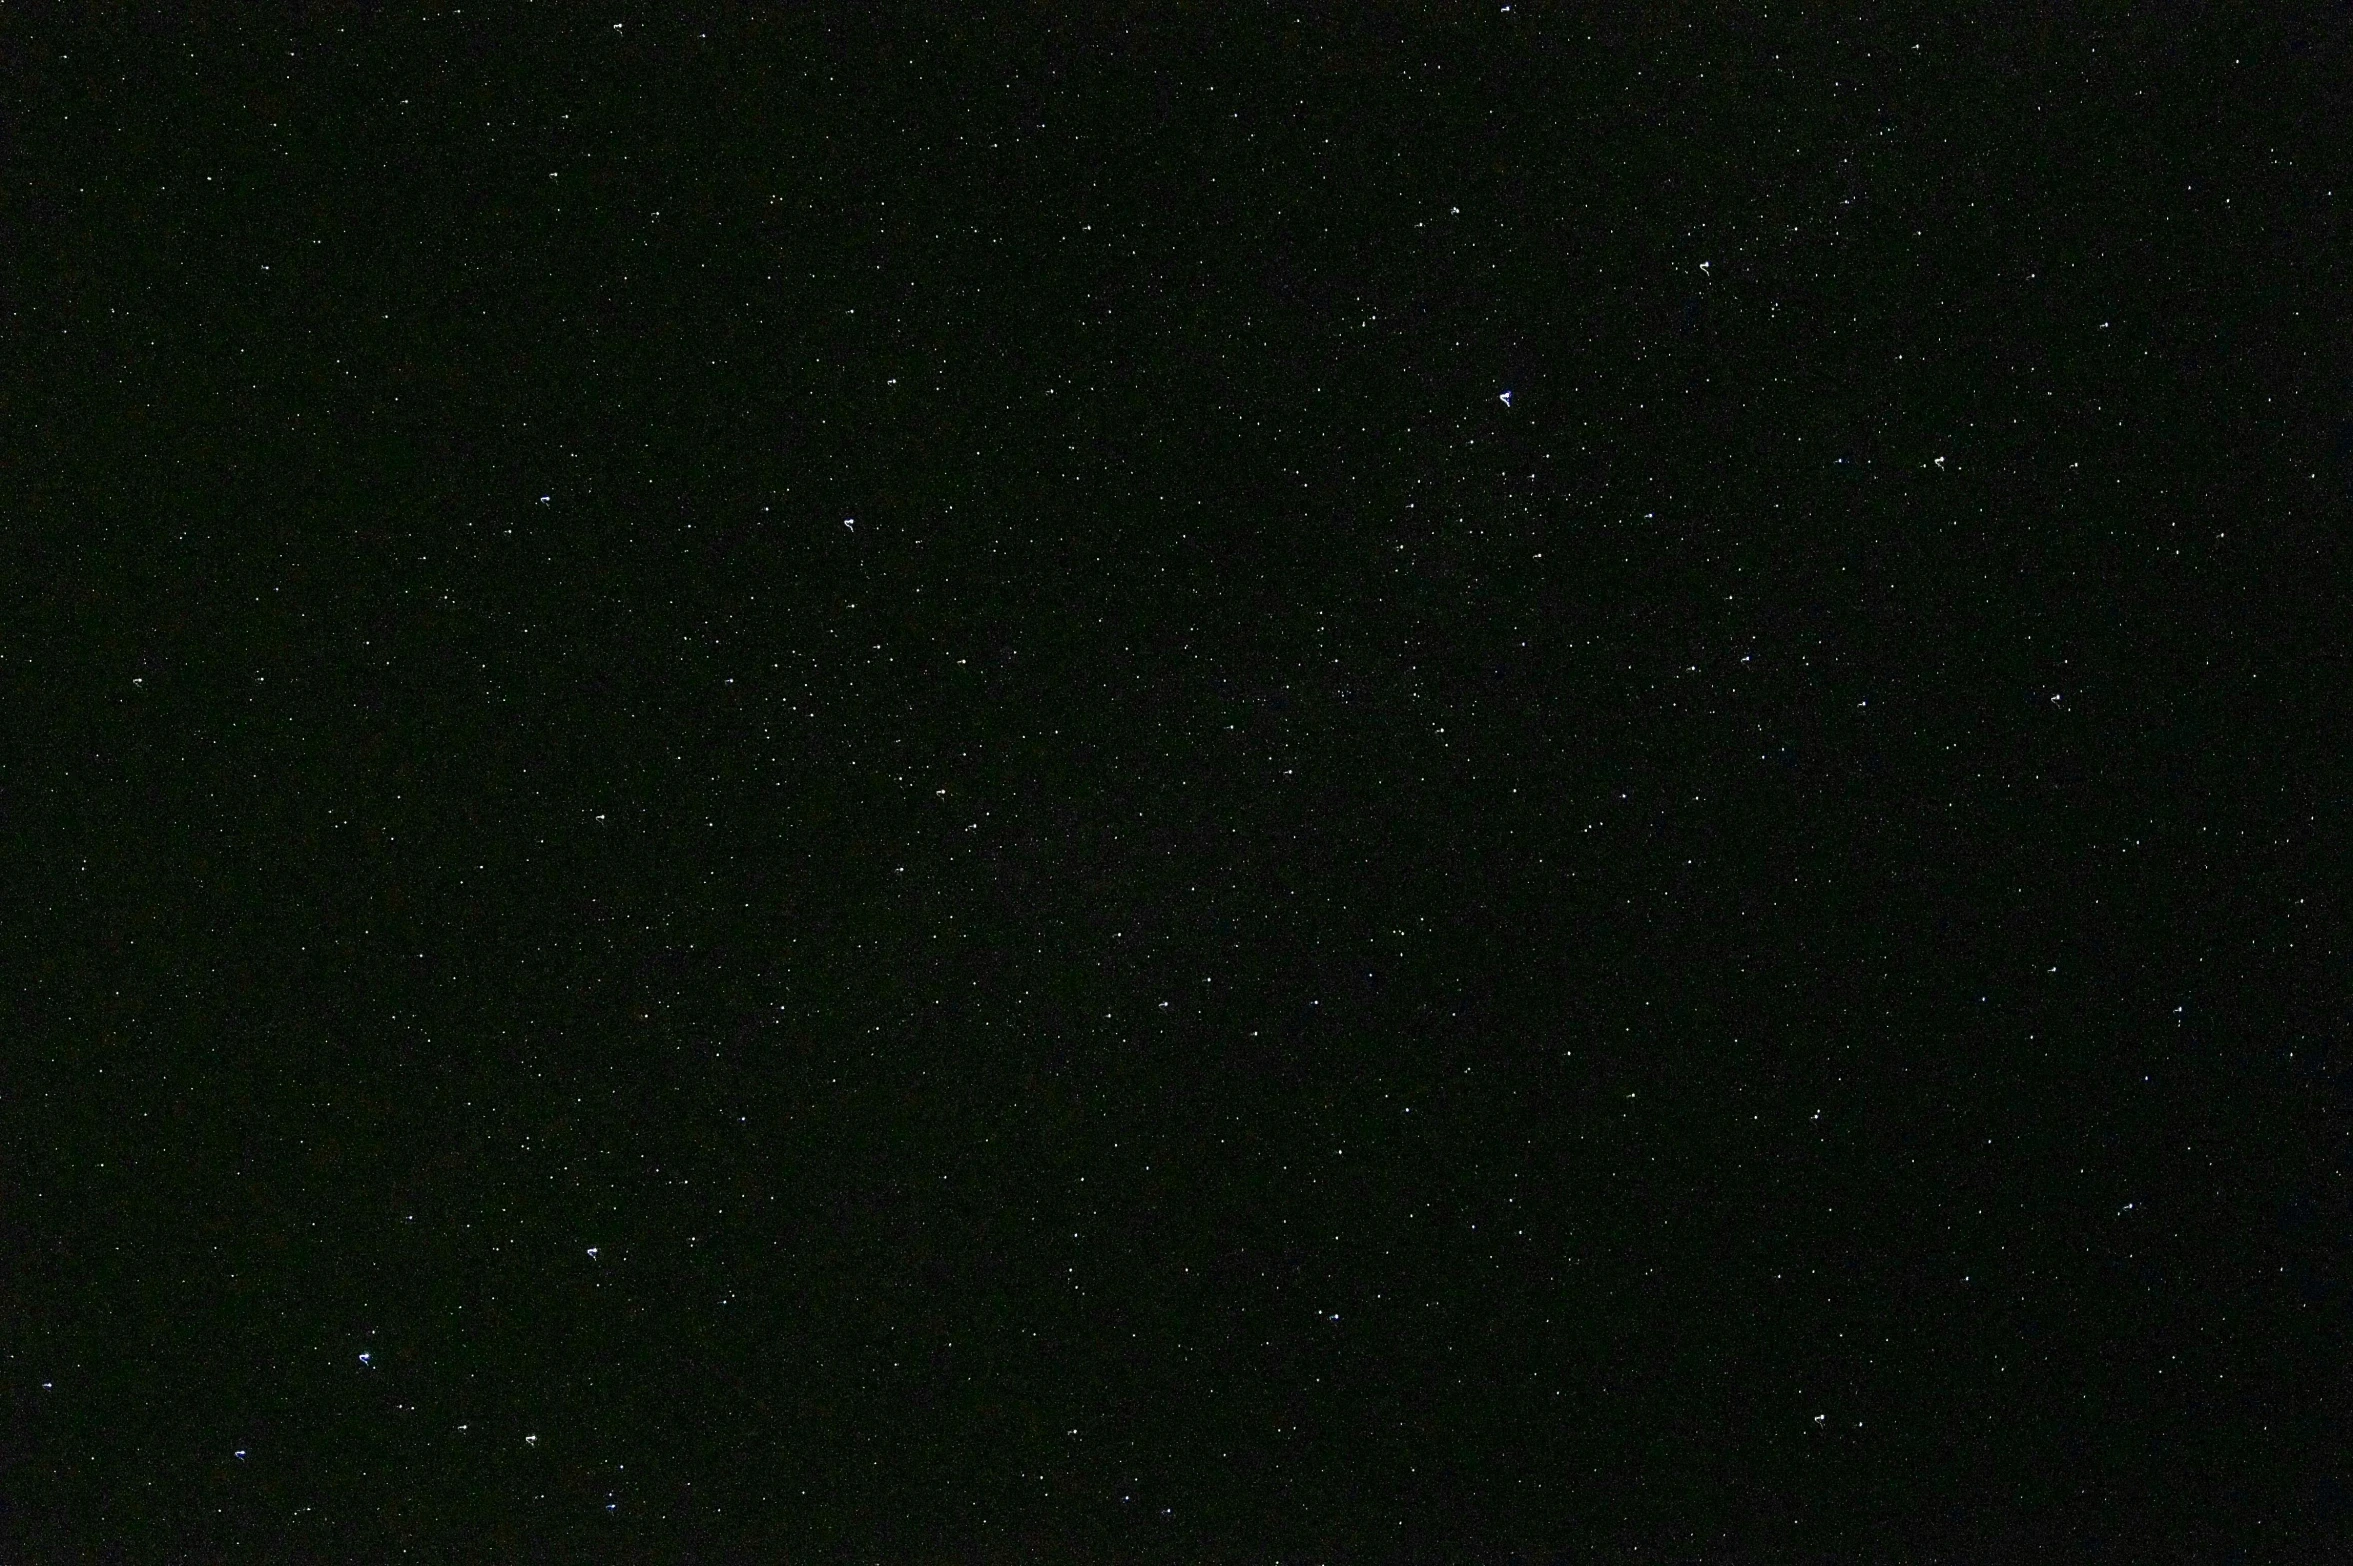 a night sky filled with lots of stars, by David Martin, minimalism, grainy, pitchblack sky, andres gursky, taken on a 2000s camera